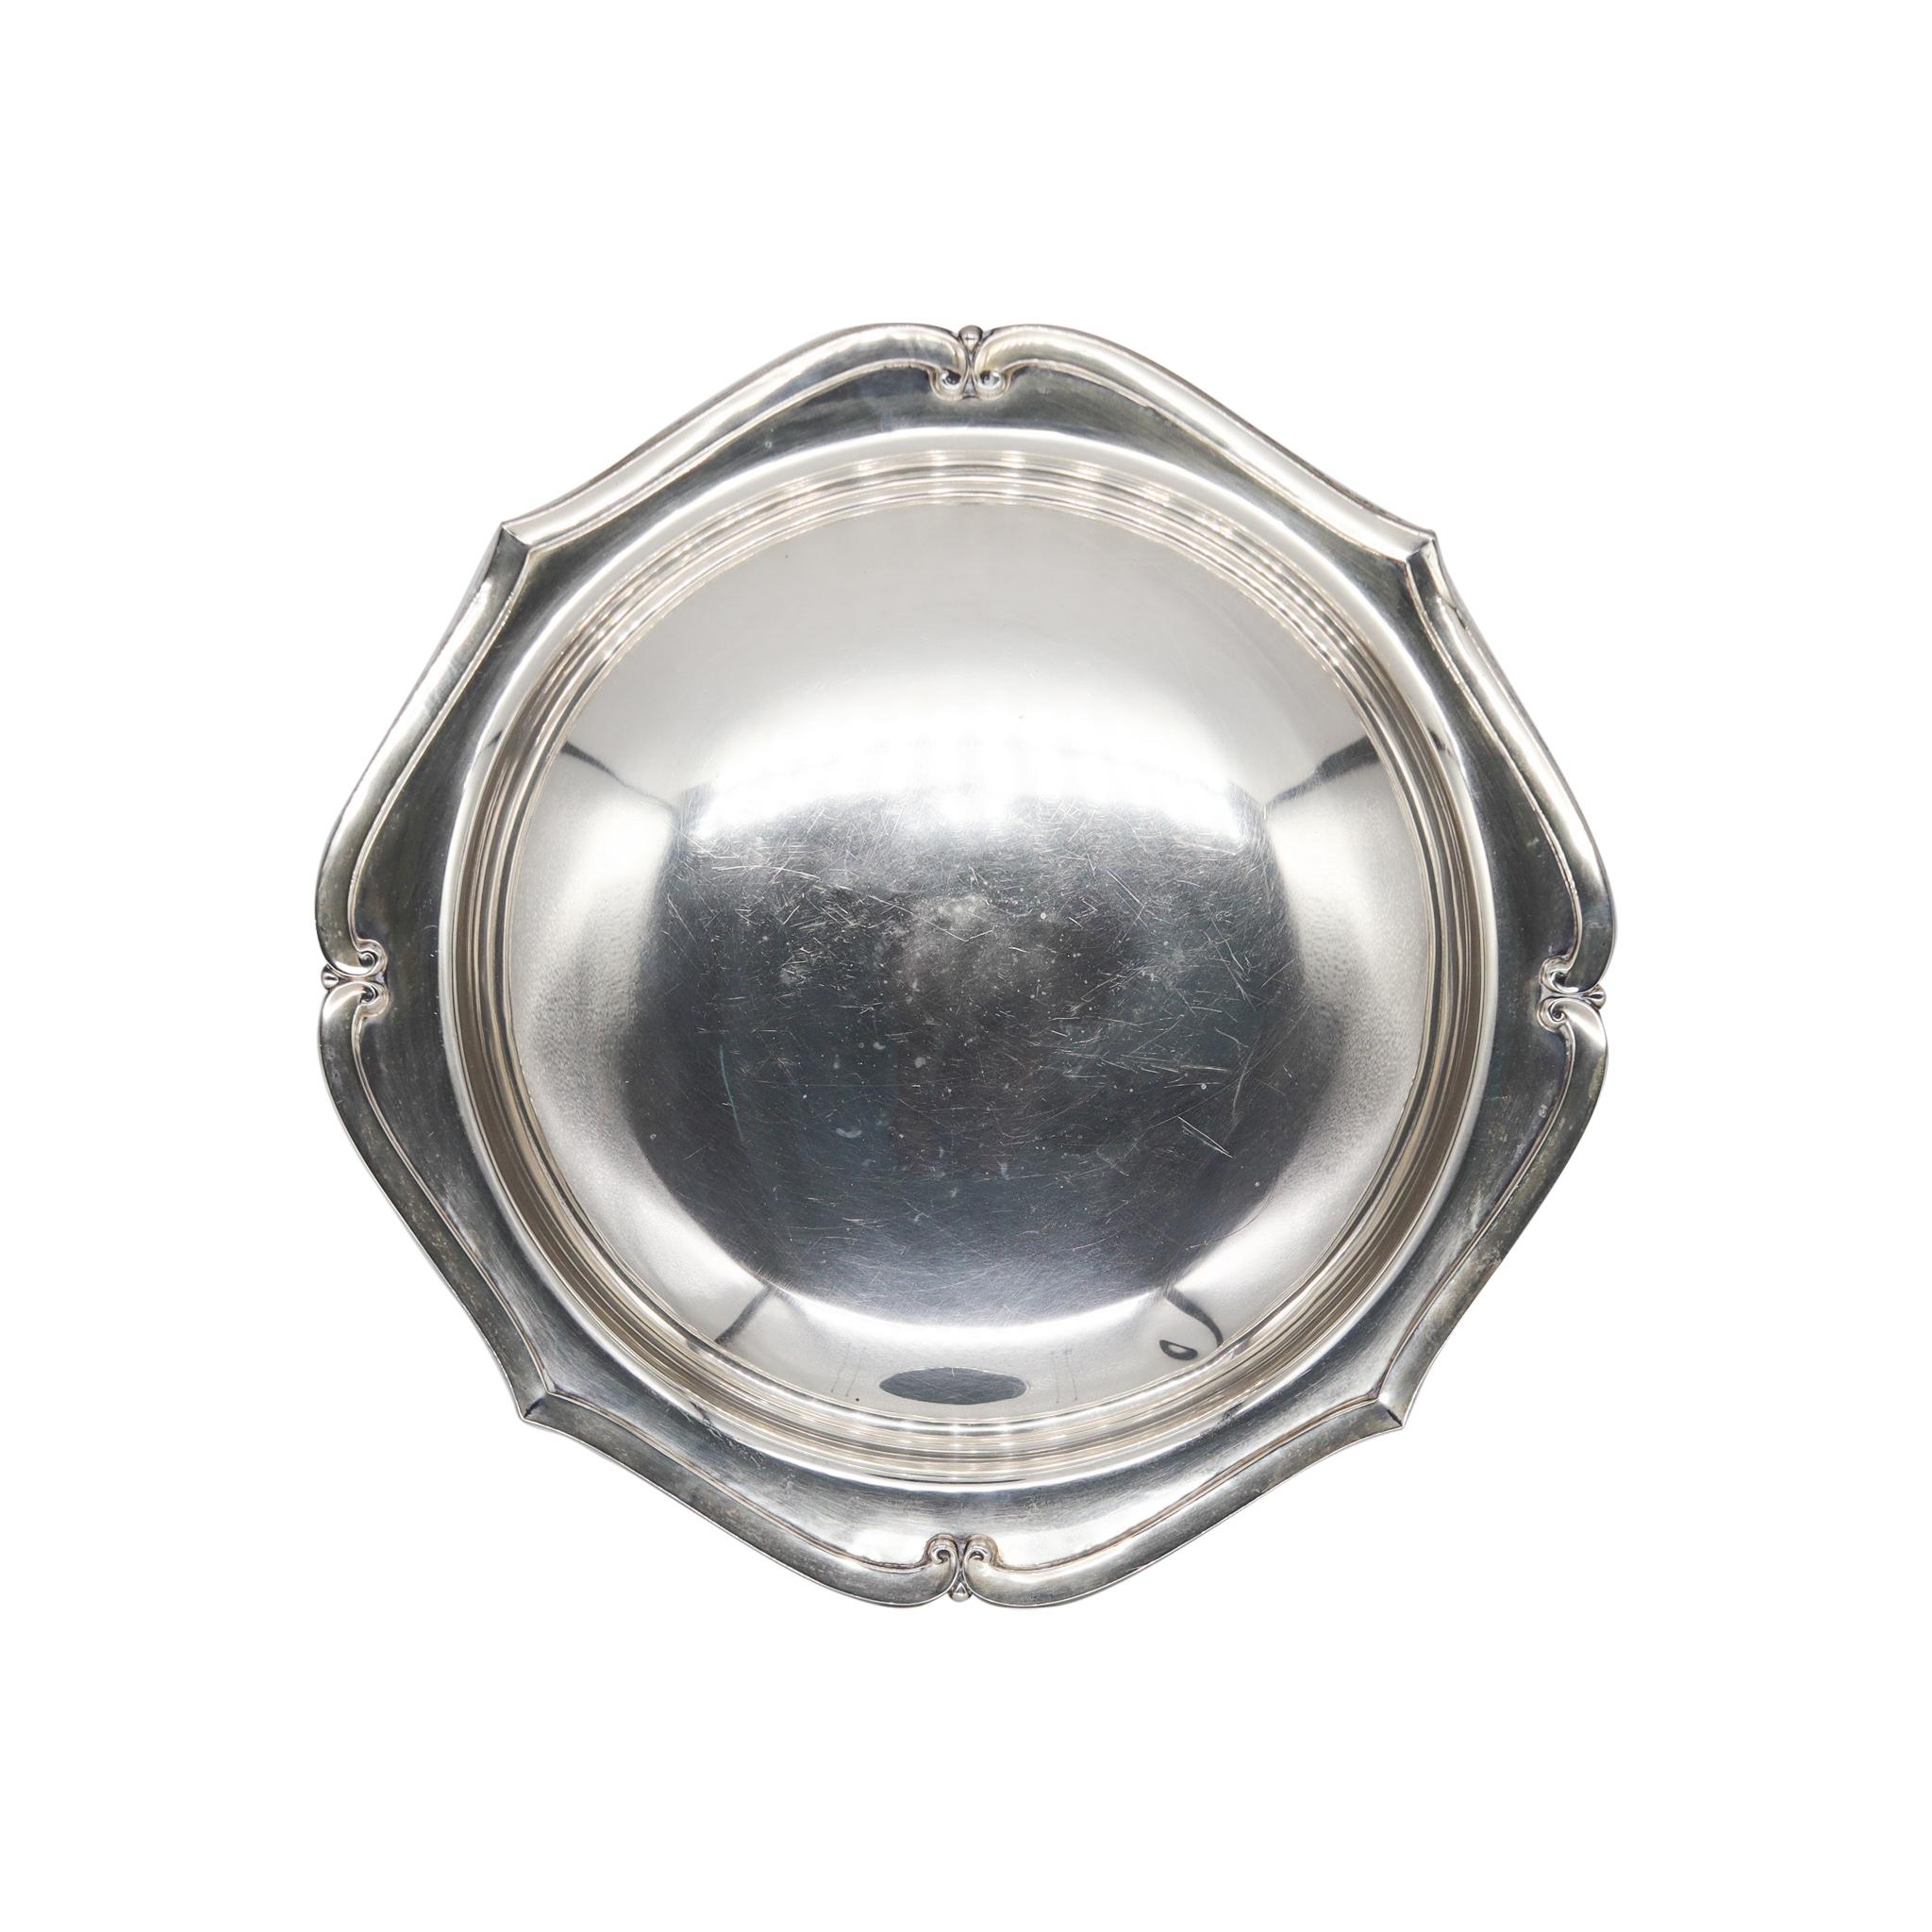 A vegetable bowl designed by the International Silver Co.

Beautiful antique American piece, created during the art deco period by the International Silver Co, back in the 1925. This oversized vegetable bowl has been crafted in solid .925/.999